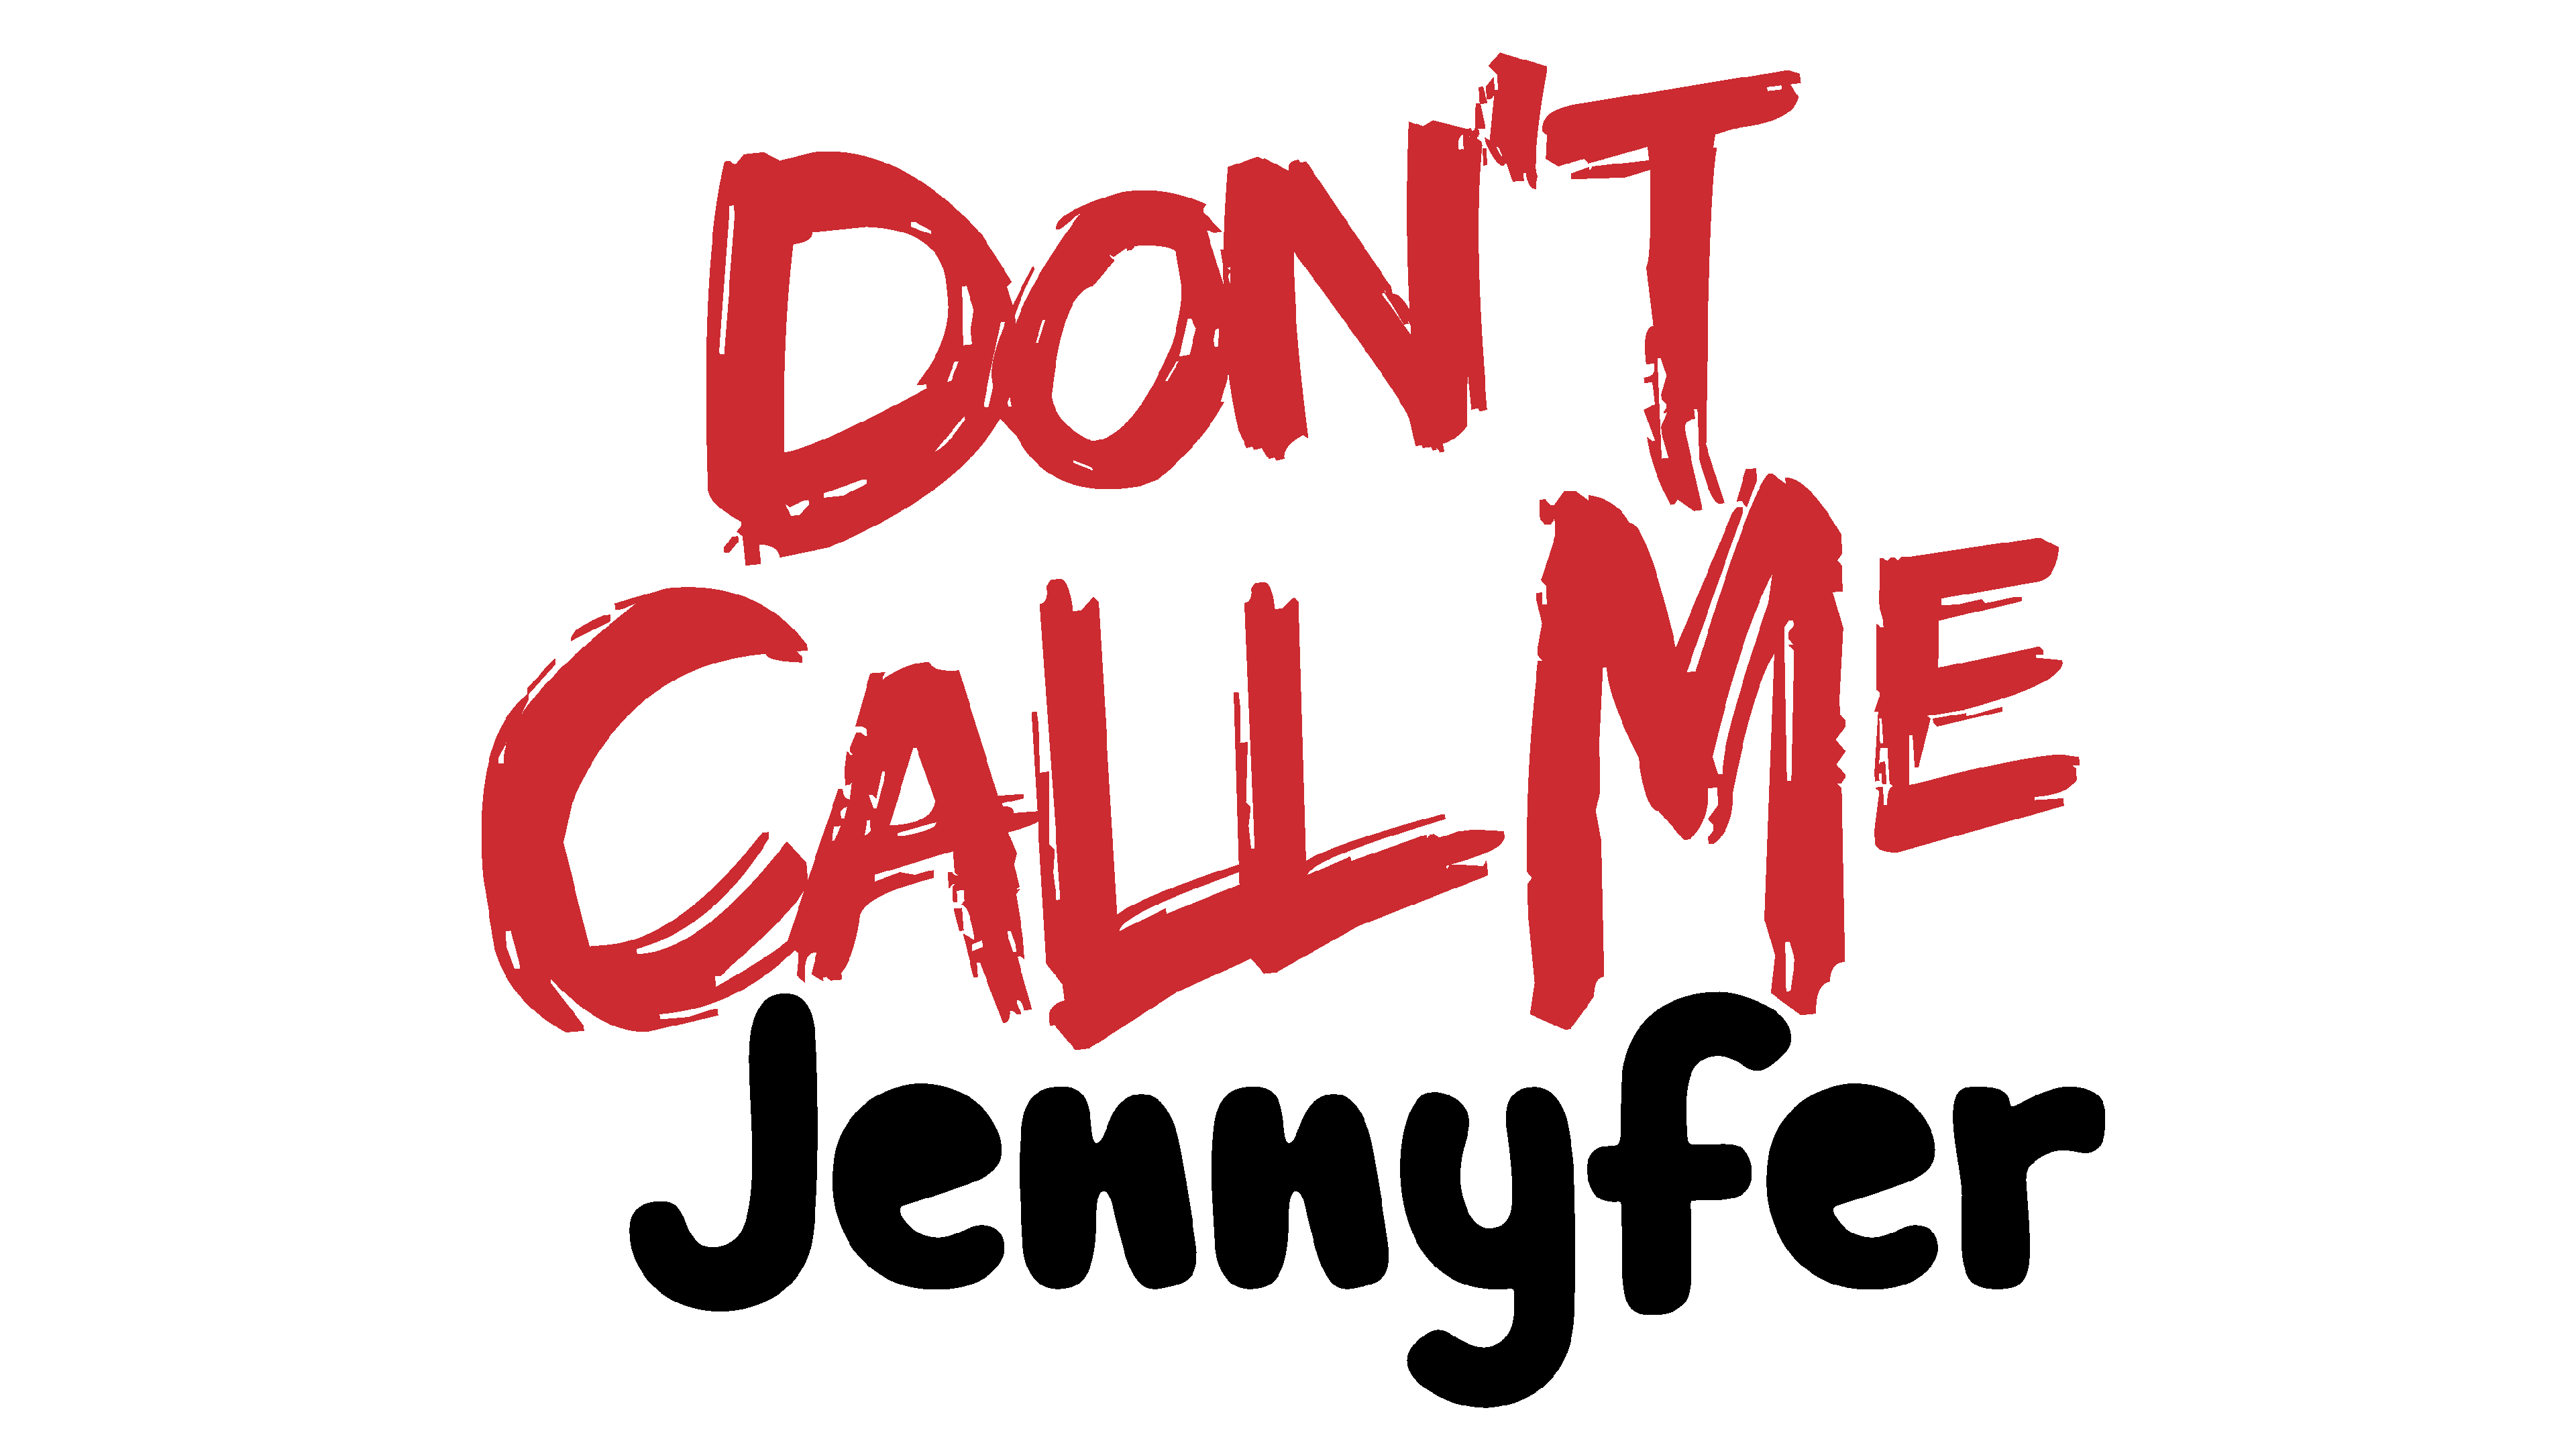 Dont le. Dont Call me Jennyfer. Dont Call me Jennyfer бренд. Dont Call me Jennifer одежда. Don't Call me Jennifer платья.